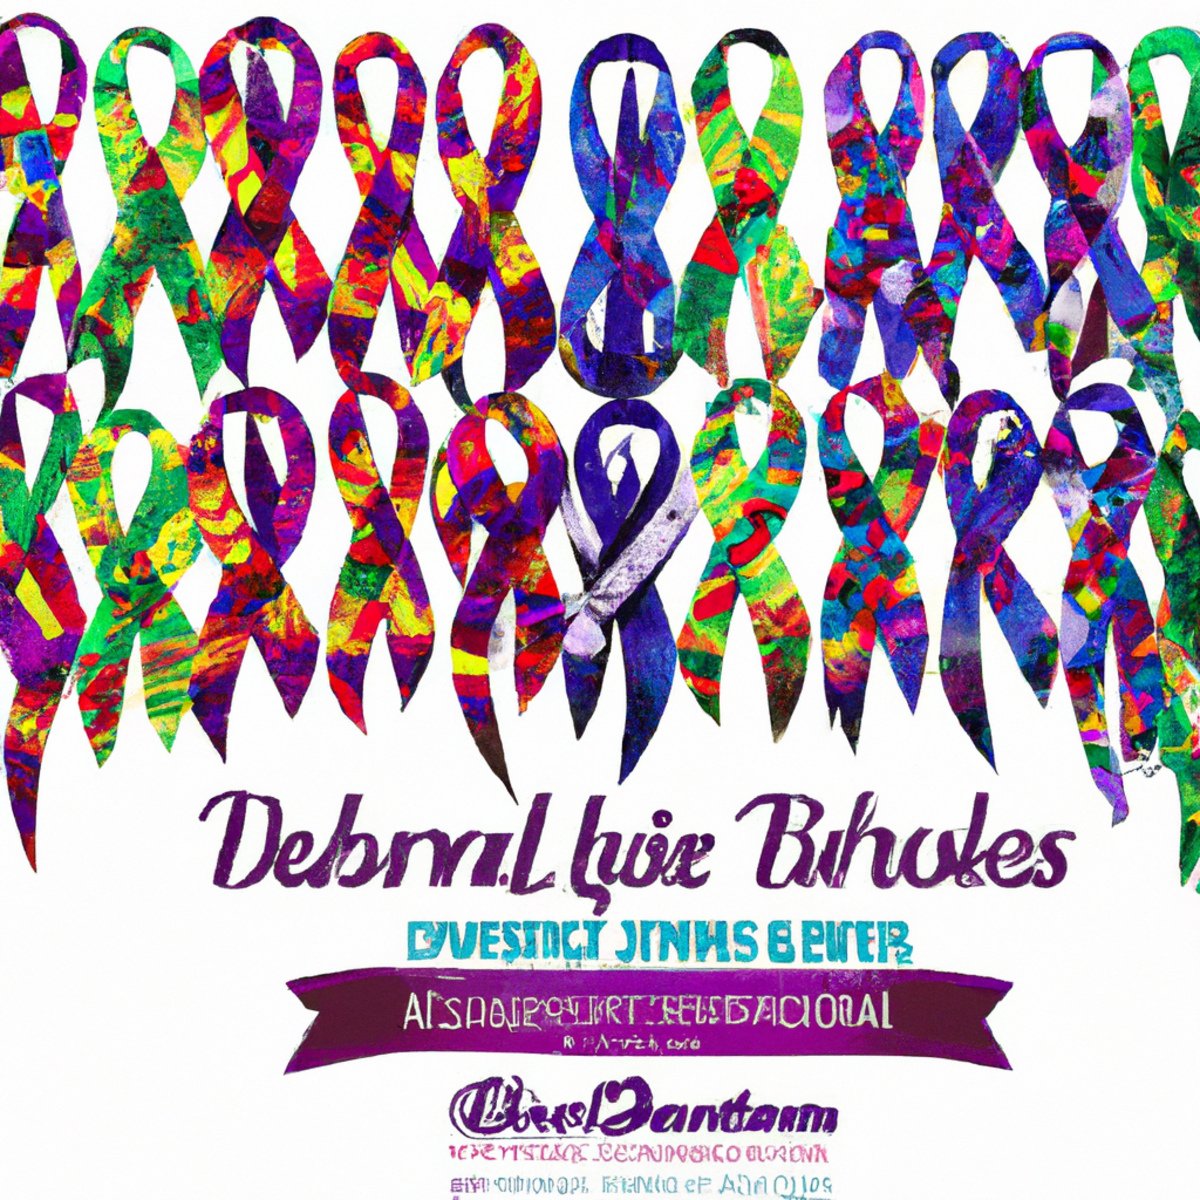 Vibrant ribbons symbolize rare liver diseases, showcasing unity and support within the community - Budd-Chiari Syndrome